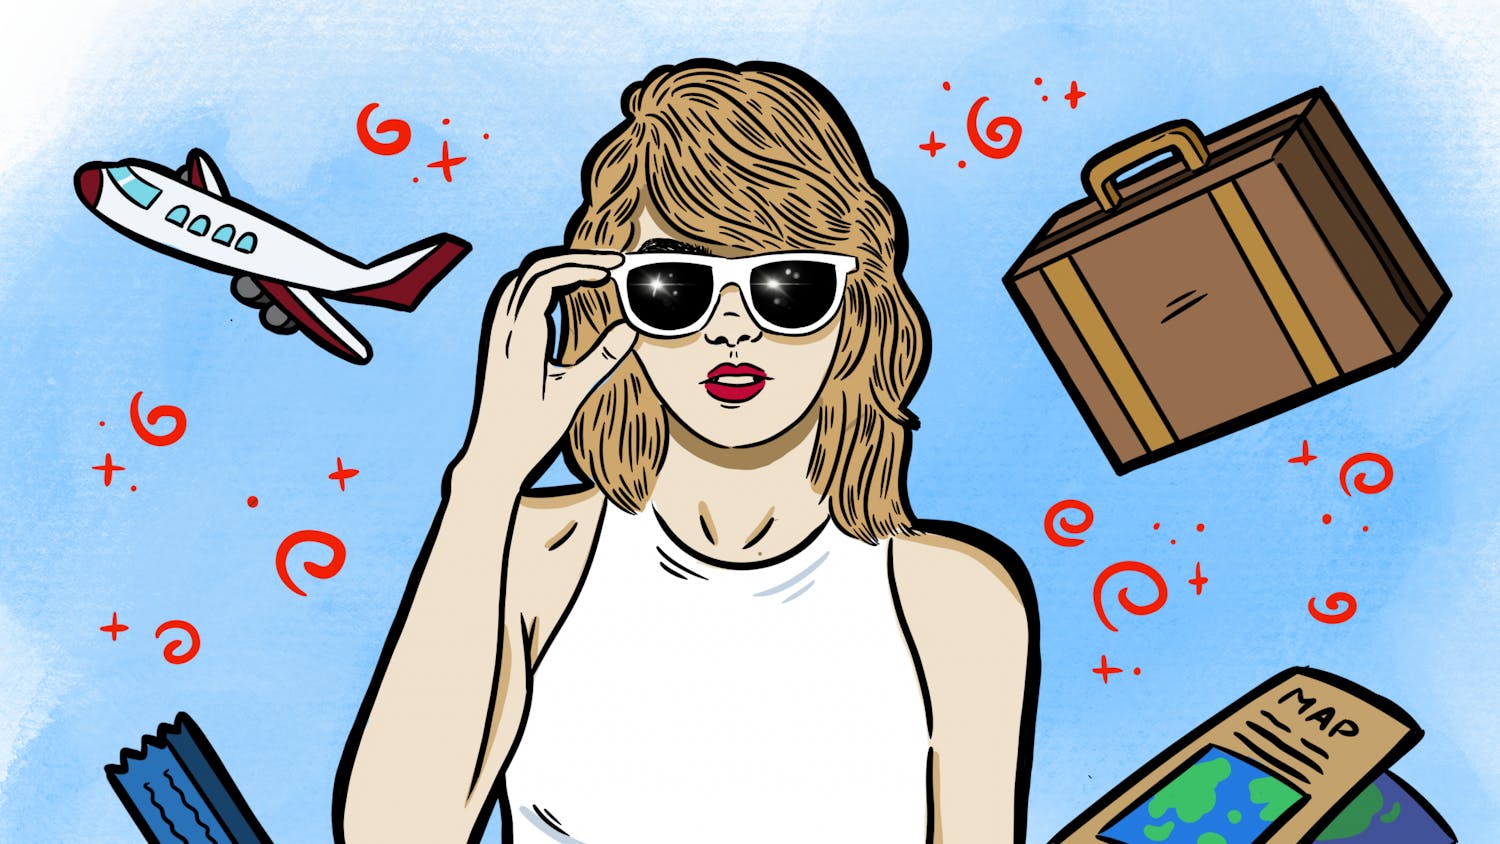 VINCE_Here's what your favorite song from Taylor Swift's 1989 album says about you_LA.png